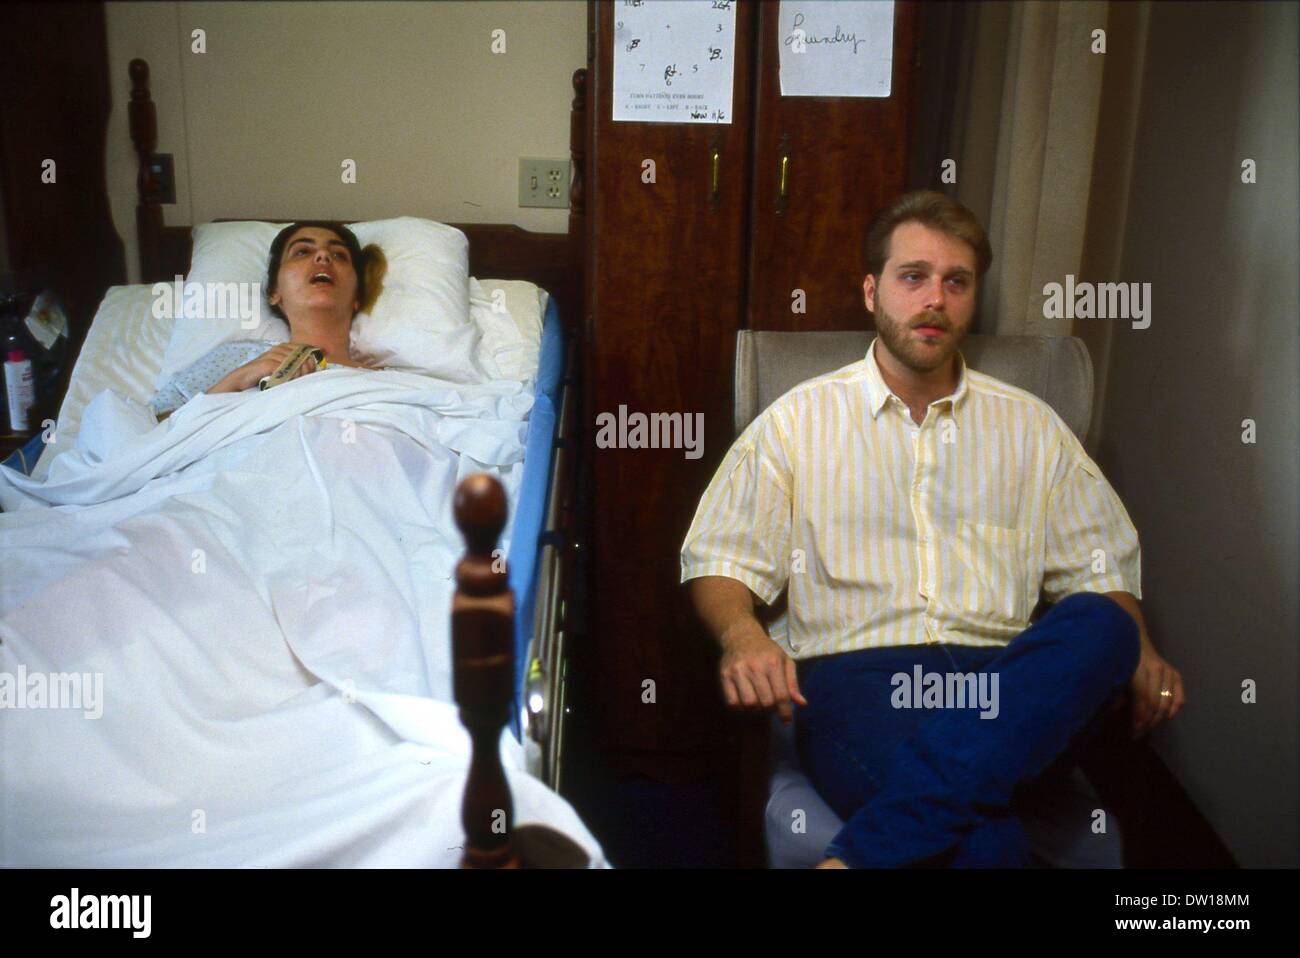 Nov 7, 1990 - St Petersburg, Florida, U.S. - MIKE SCHIAVO visits with his wife TERRI SCHIAVO, a coma victim at College Harbor Nursing Home. Terri Schiavo collapsed in her St. Petersburg, Florida, home in full cardiac arrest on February 25, 1990. She suffered massive brain damage due to lack of oxygen and, after two and a half months in a coma, her diagnosis was changed to vegetative state. In 1998 Schiavo's husband, Michael, petitioned the Sixth Circuit Court of Florida (Pinellas County), to remove her feeding tube pursuant to Florida Statutes Section 765.401(3). He was opposed by Terri's pare Stock Photo